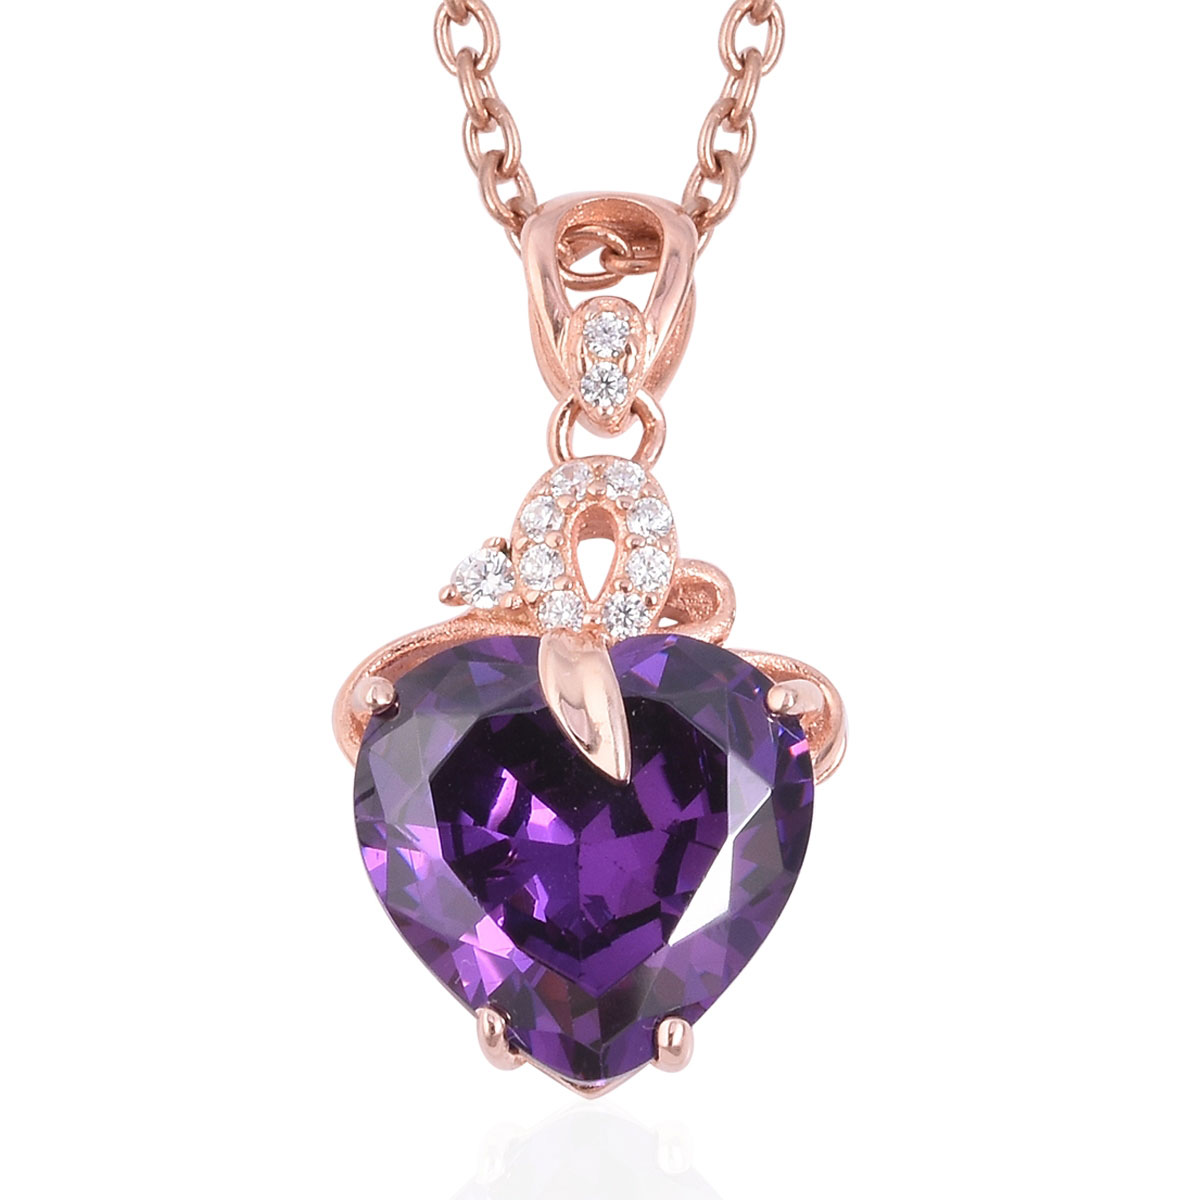 925 Silver heart shaped Womens pendantnecklace with violet like tanzanite color round faceted gemstones silver chain Used Jewelry CZ